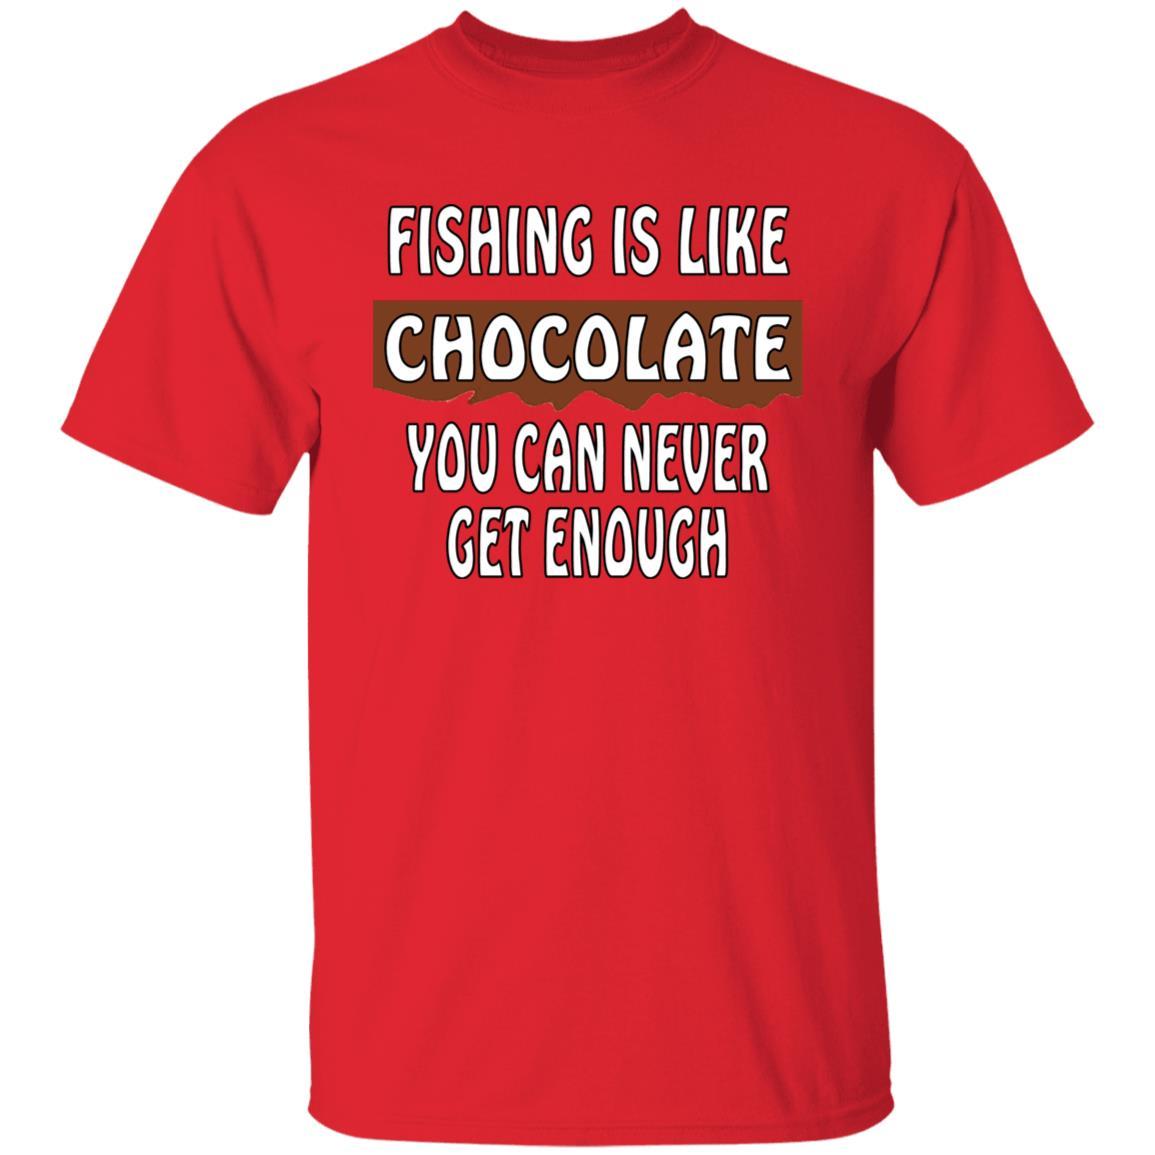 Fishing is like chocolate you can never get enough t-shirt red